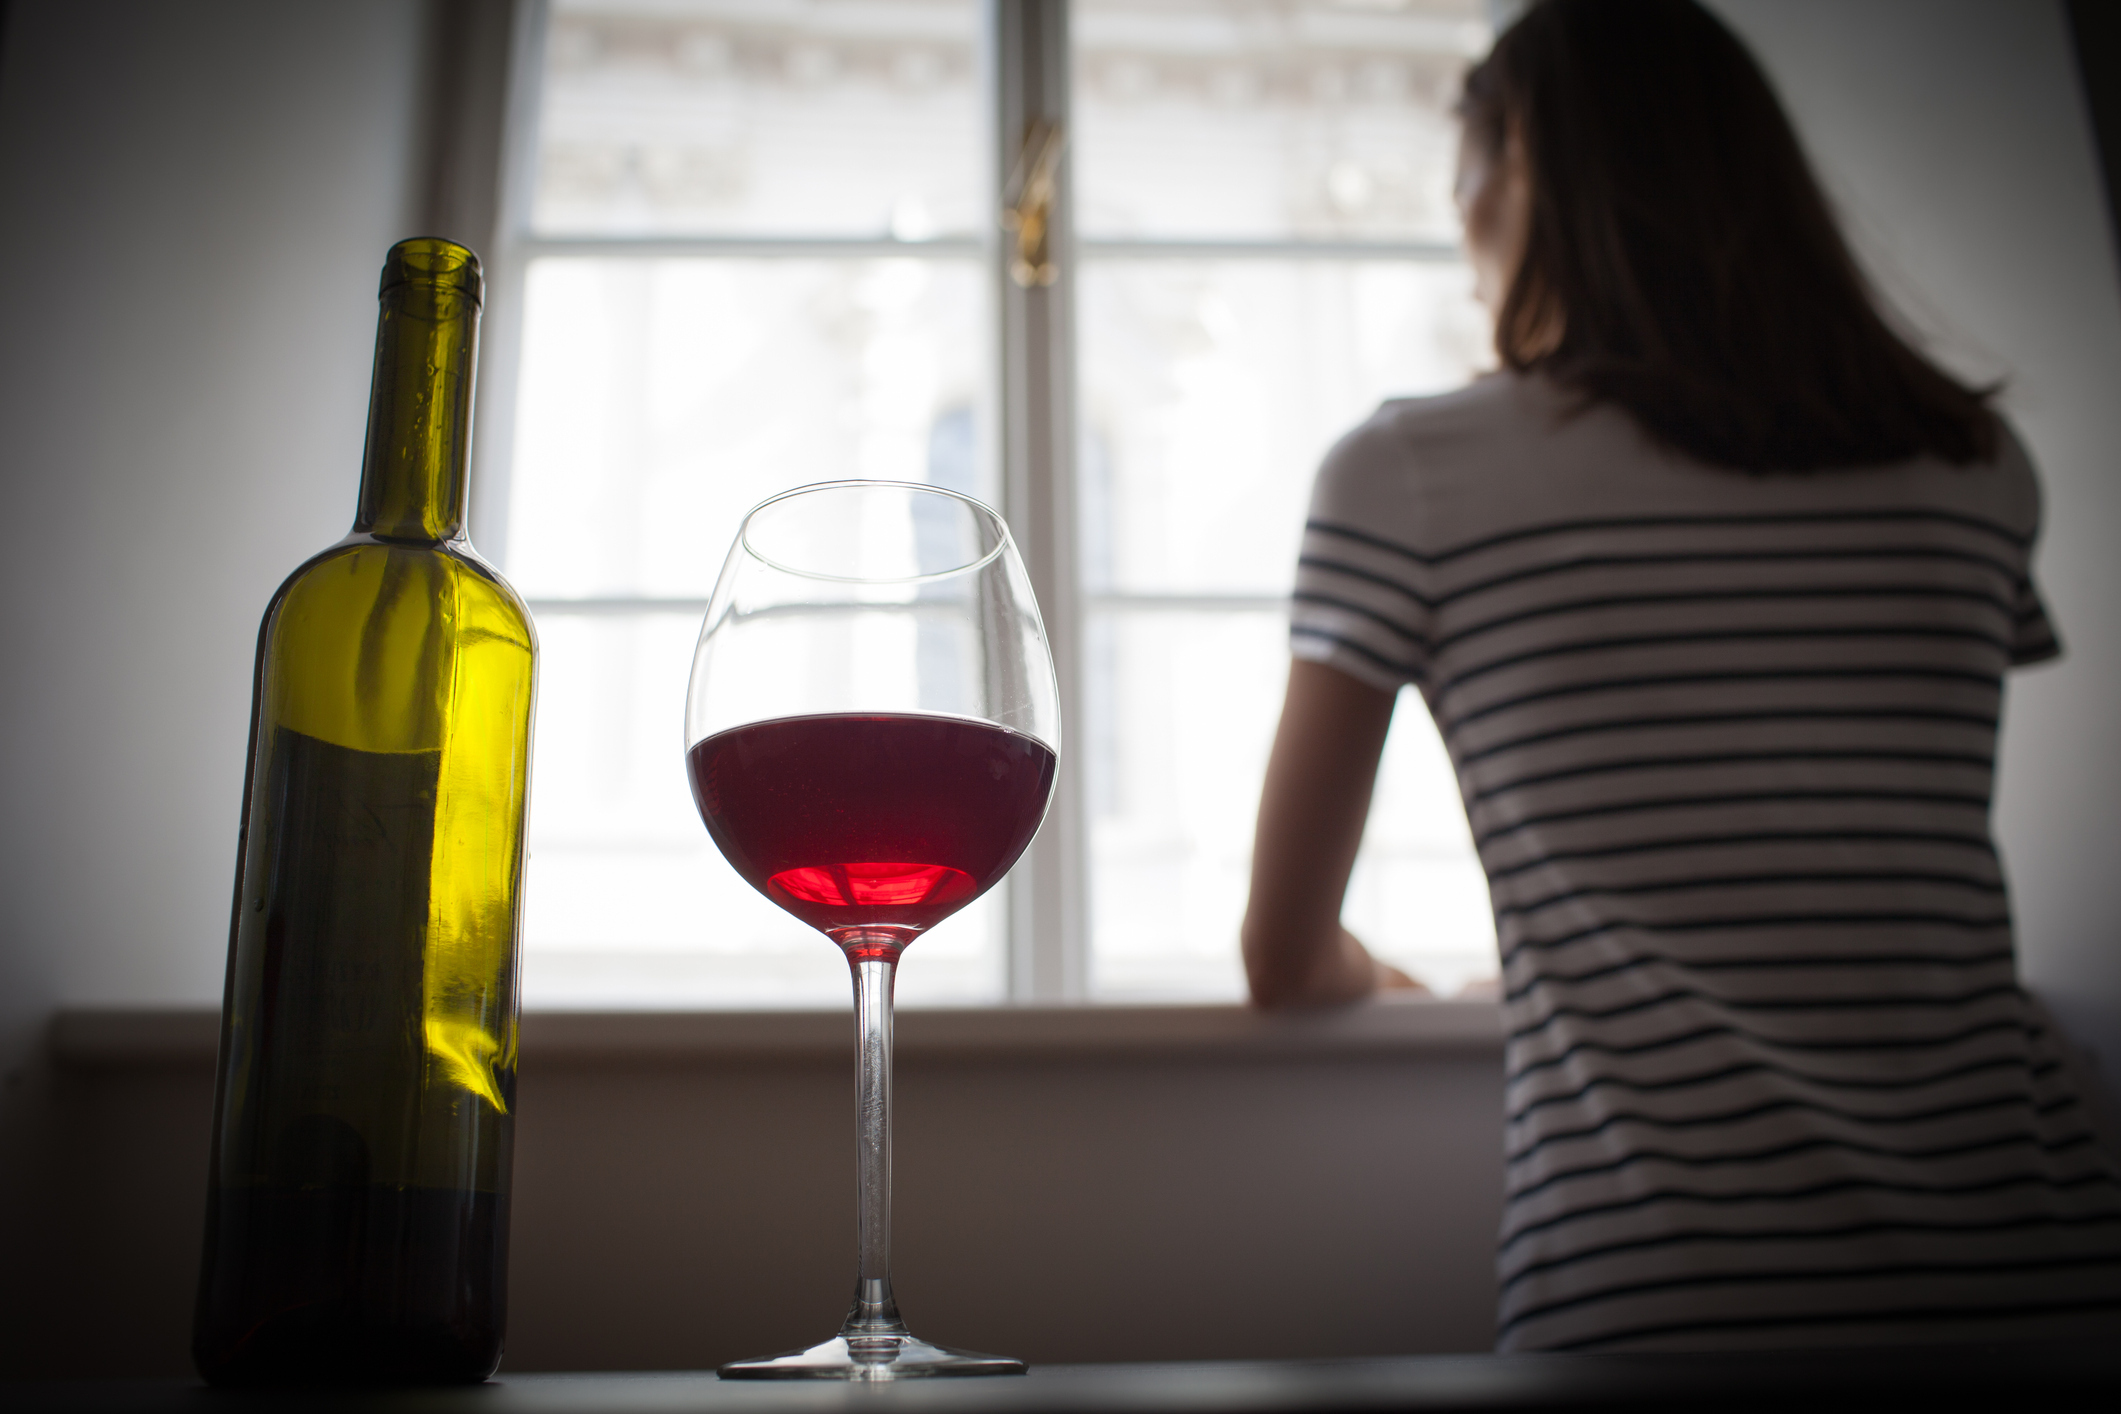 Person looks out of window with bottle and a glass of wine on a table